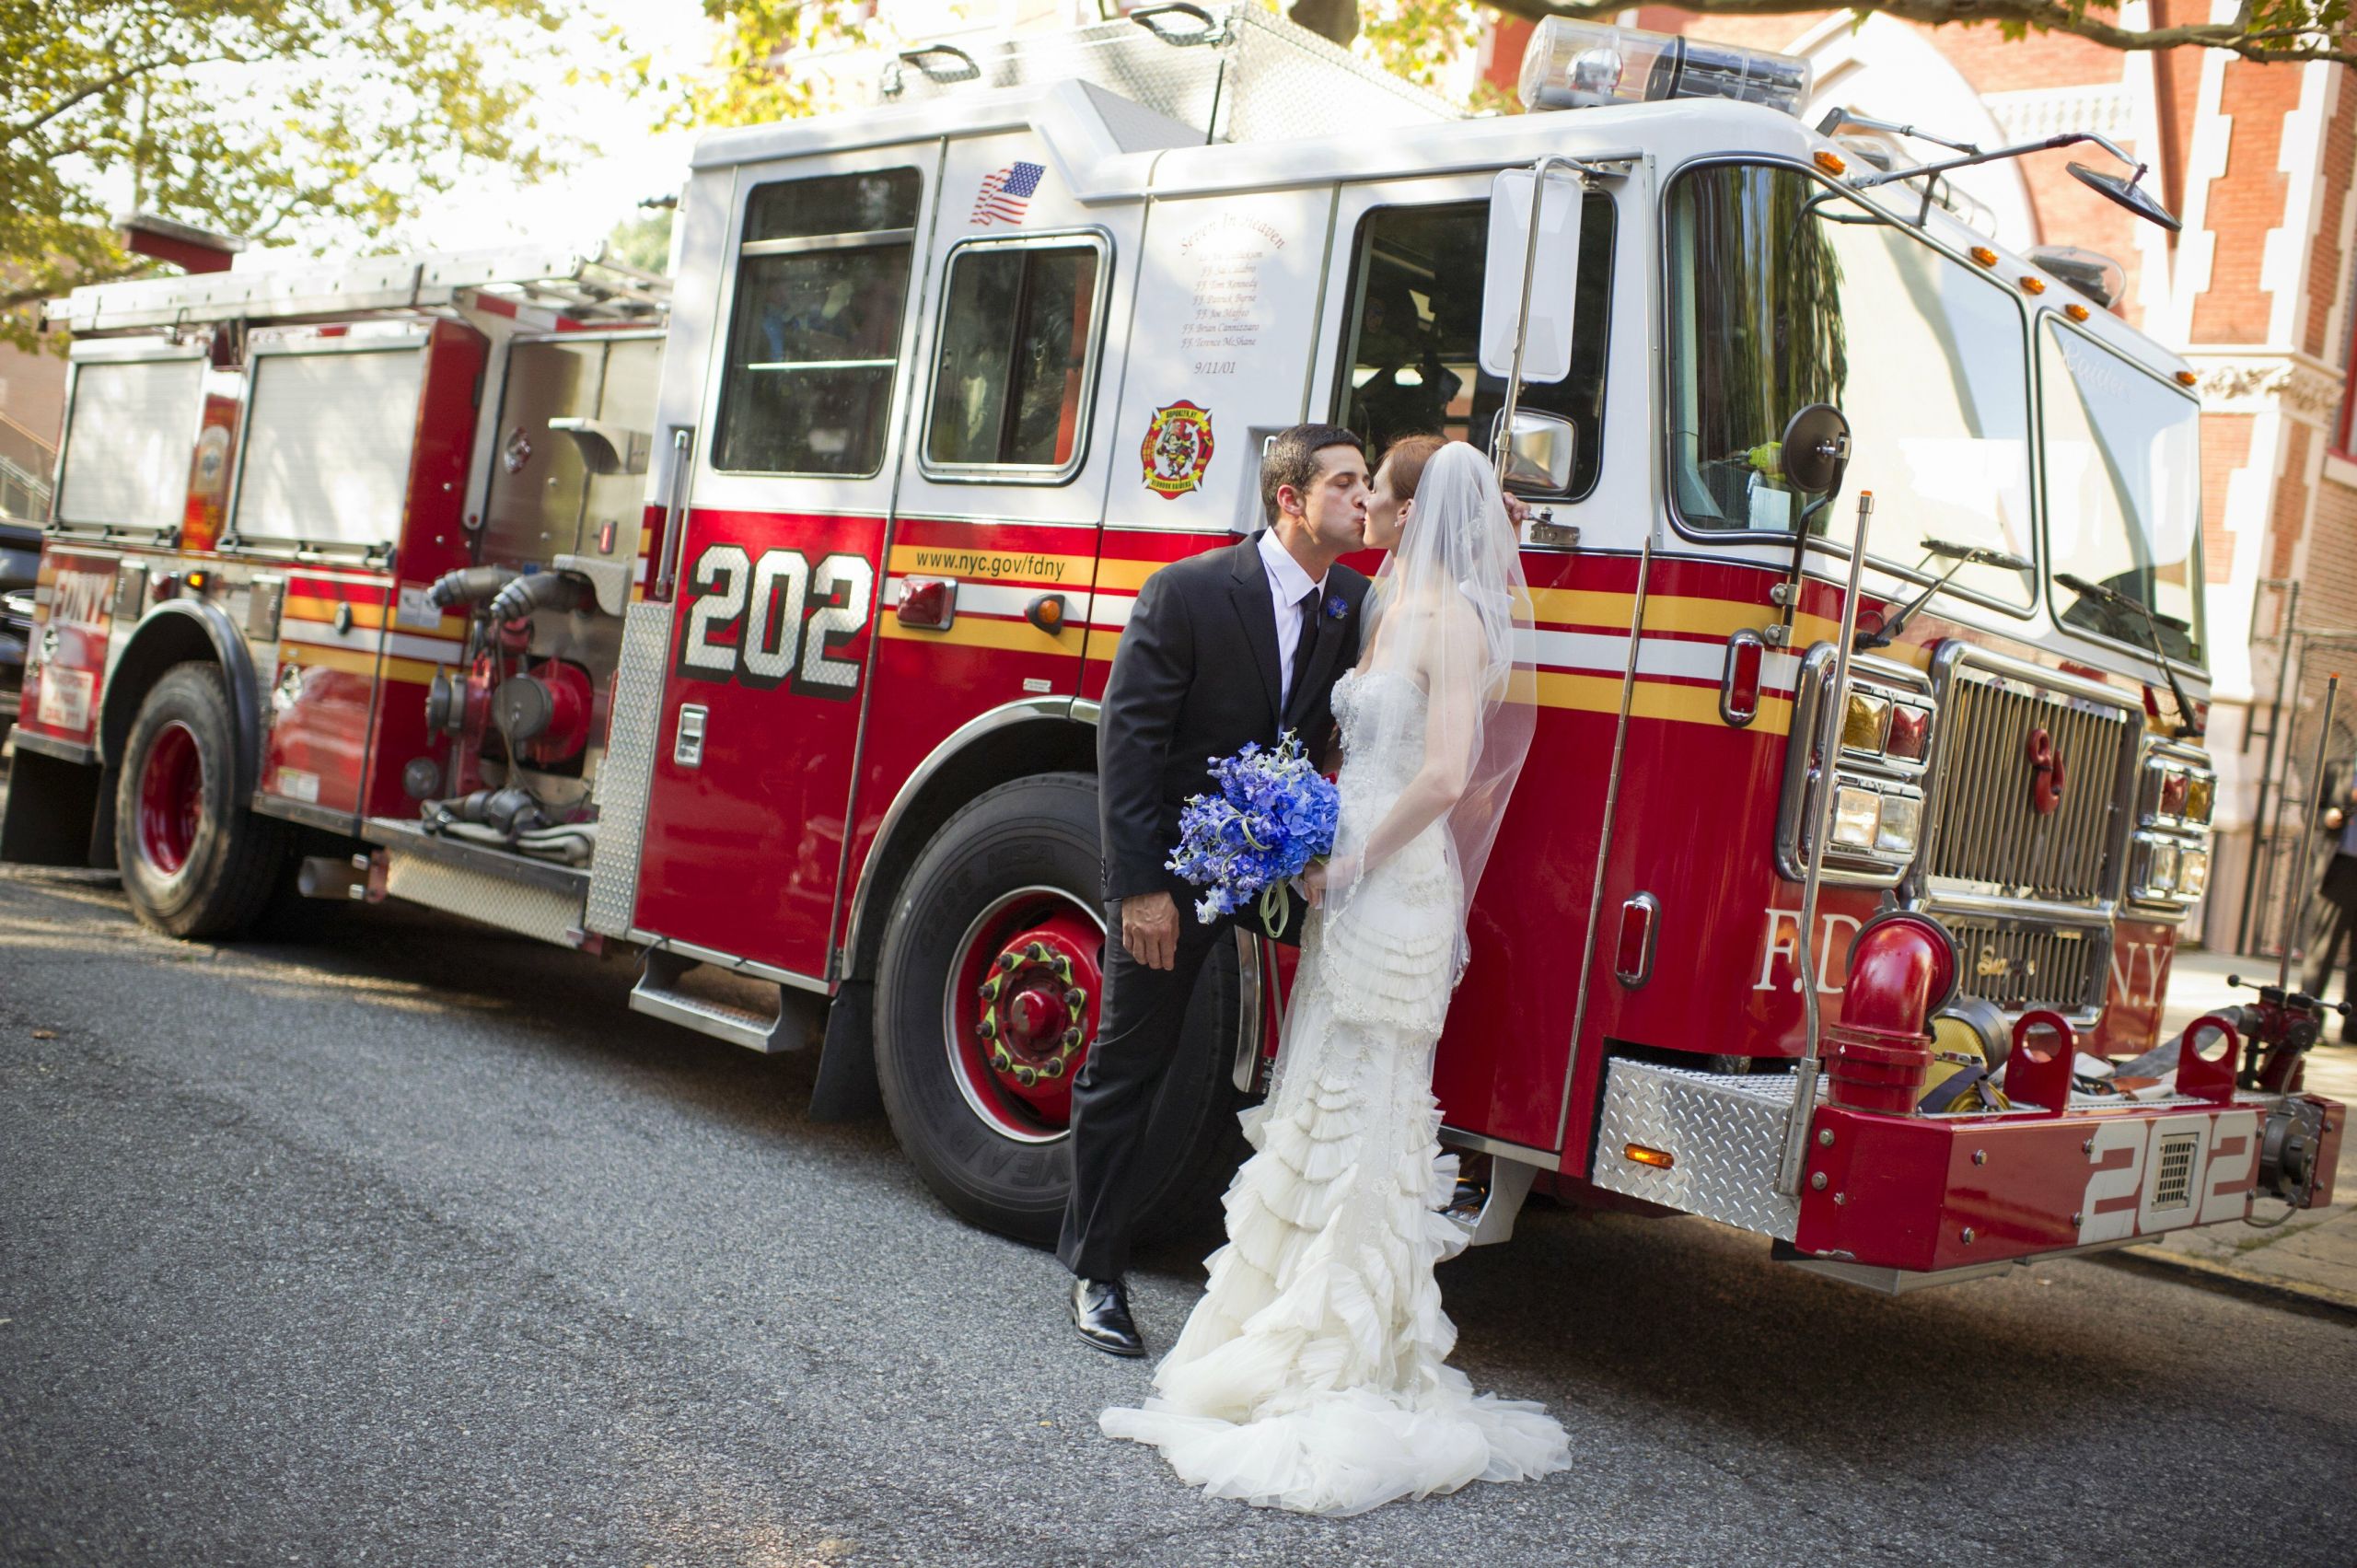 Firefighter Themed Wedding
 A Firefighter Themed Wedding in Brooklyn NY